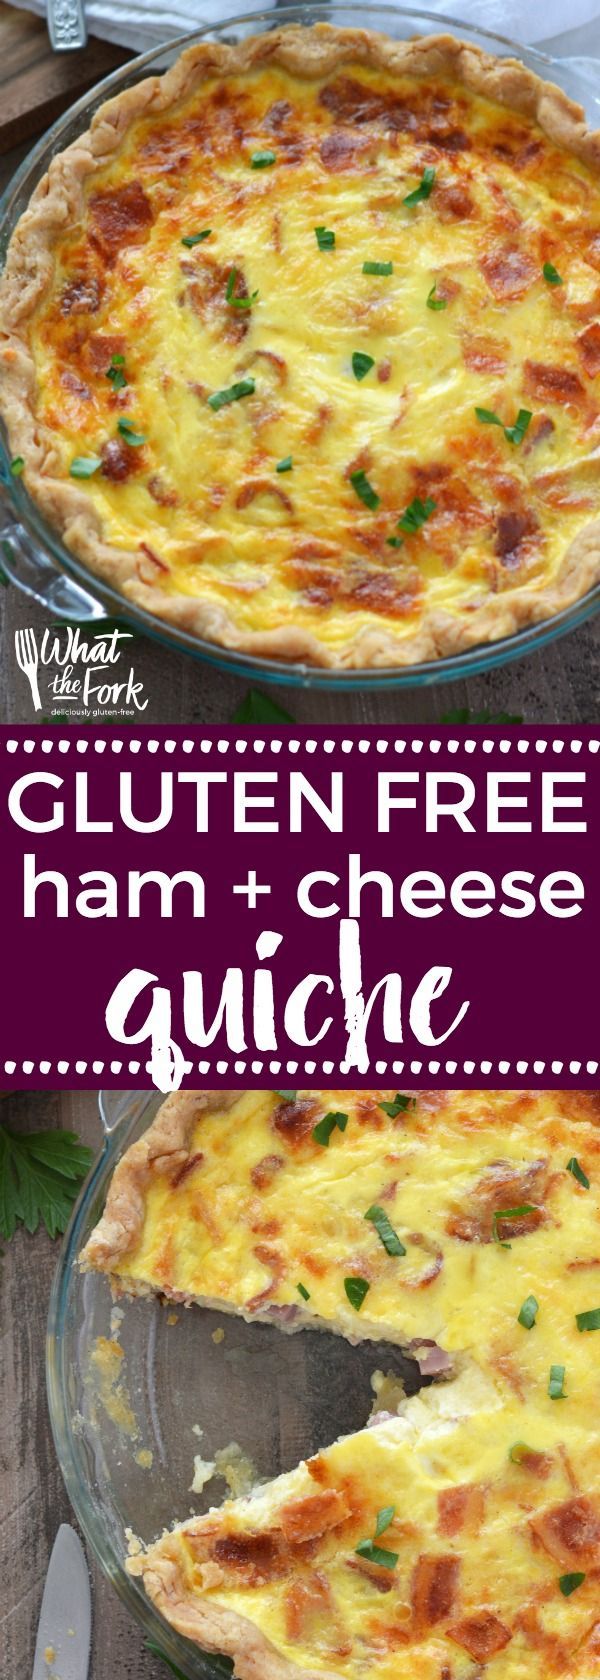 Gluten Free Ham and Cheese Quiche is perfect for breakfast, brunch, or dinner.